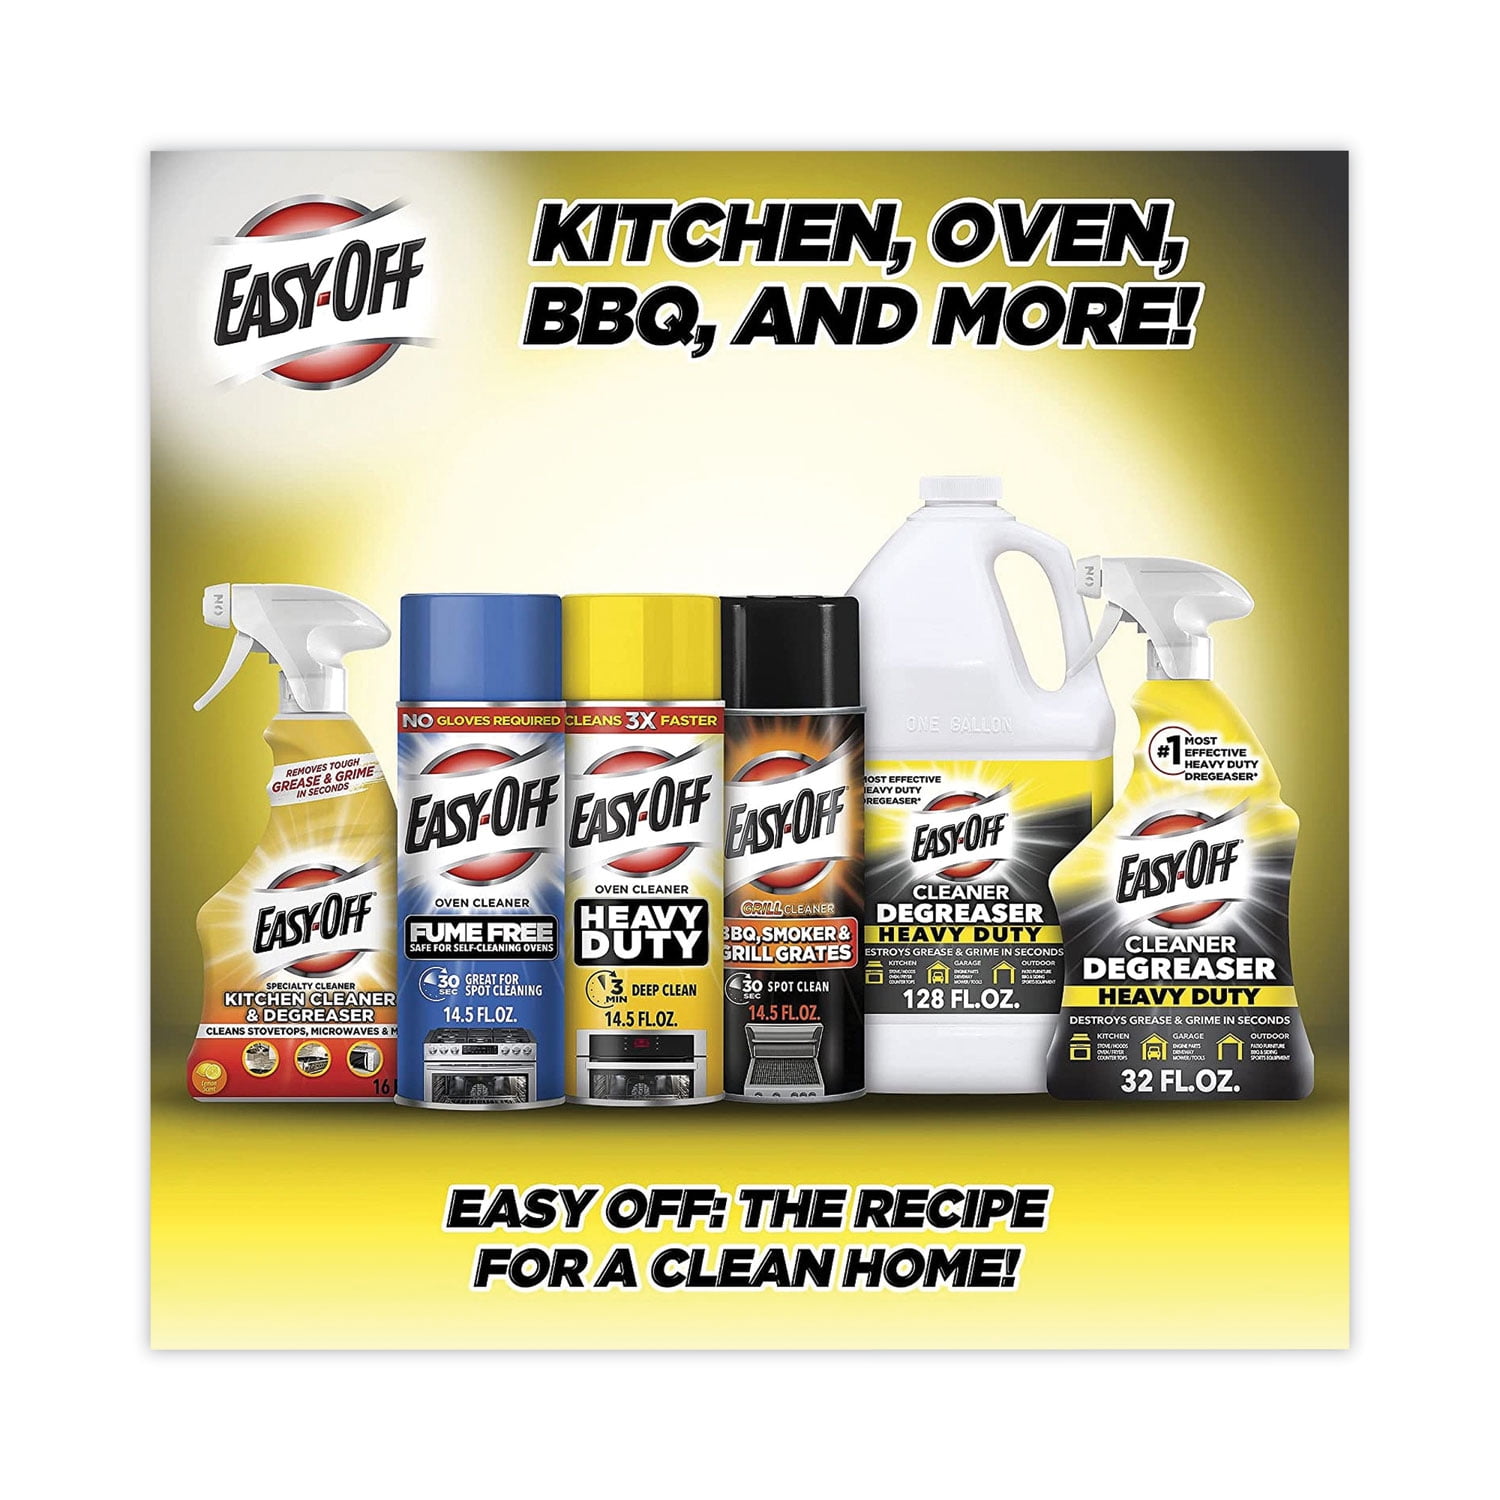 Easy Off Fume Free Oven Cleaner, Destroys Tough Burnt on Food and